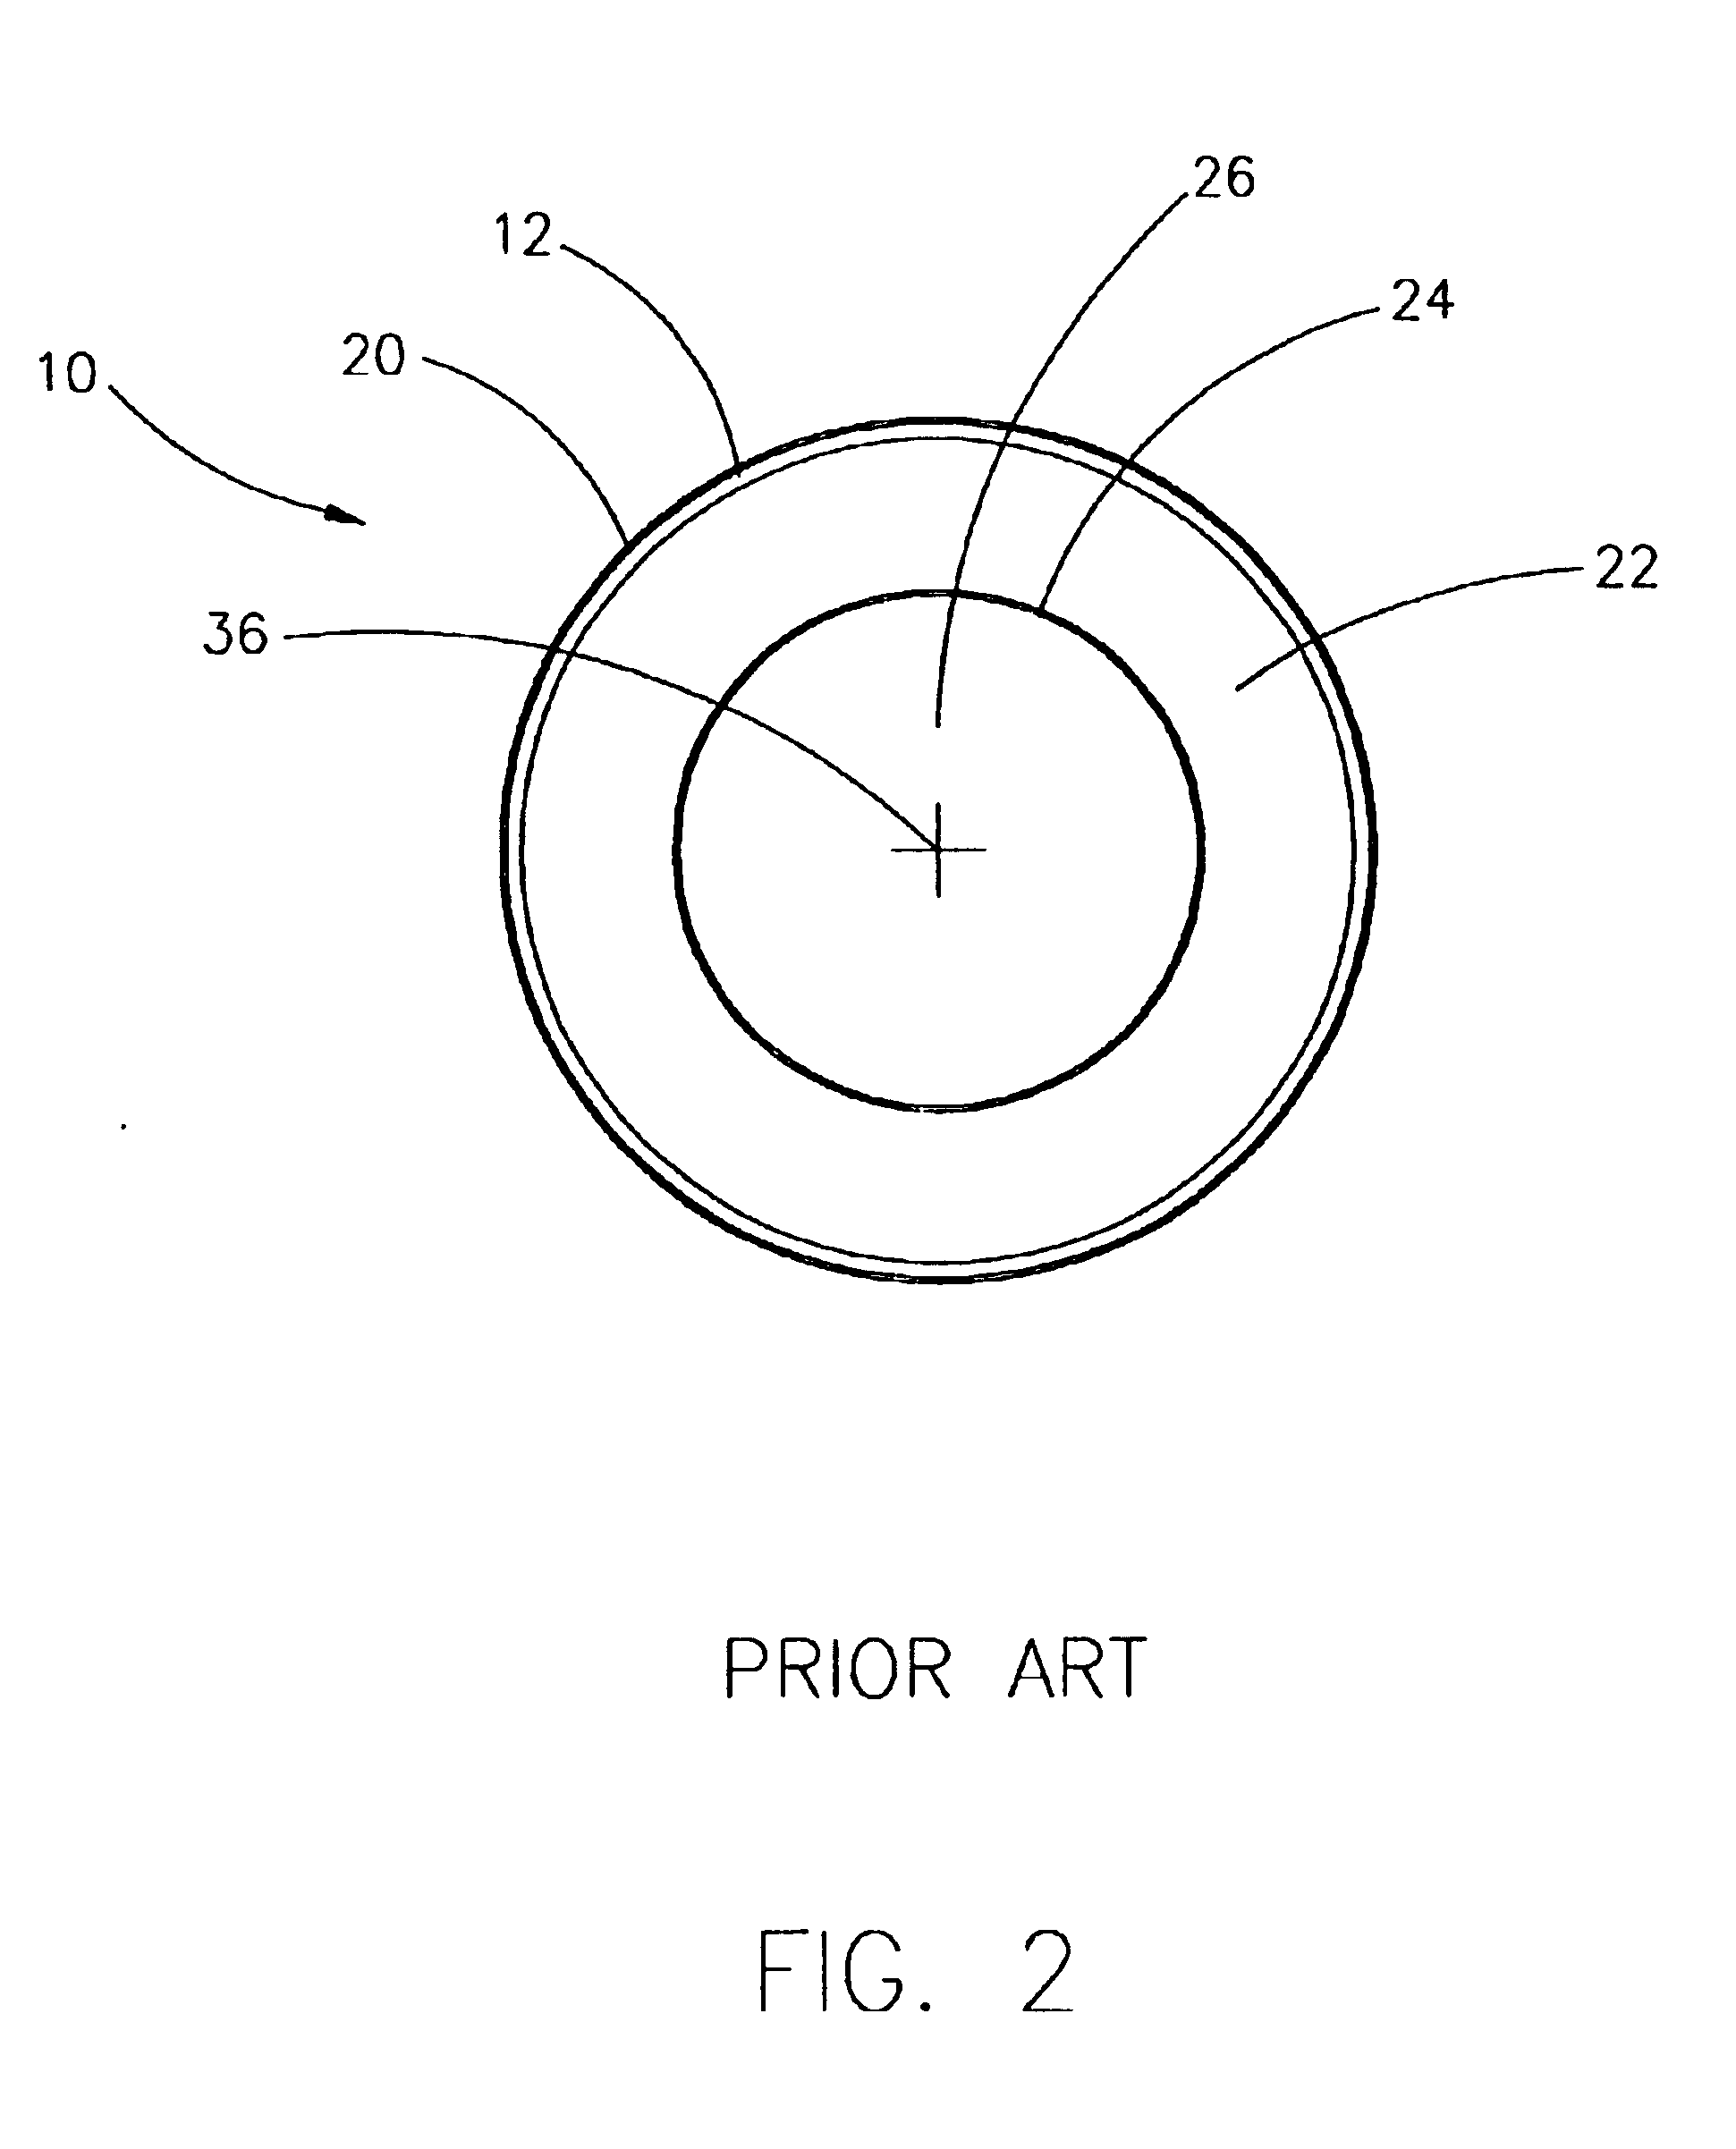 Battery with high electrode interfacial surface area